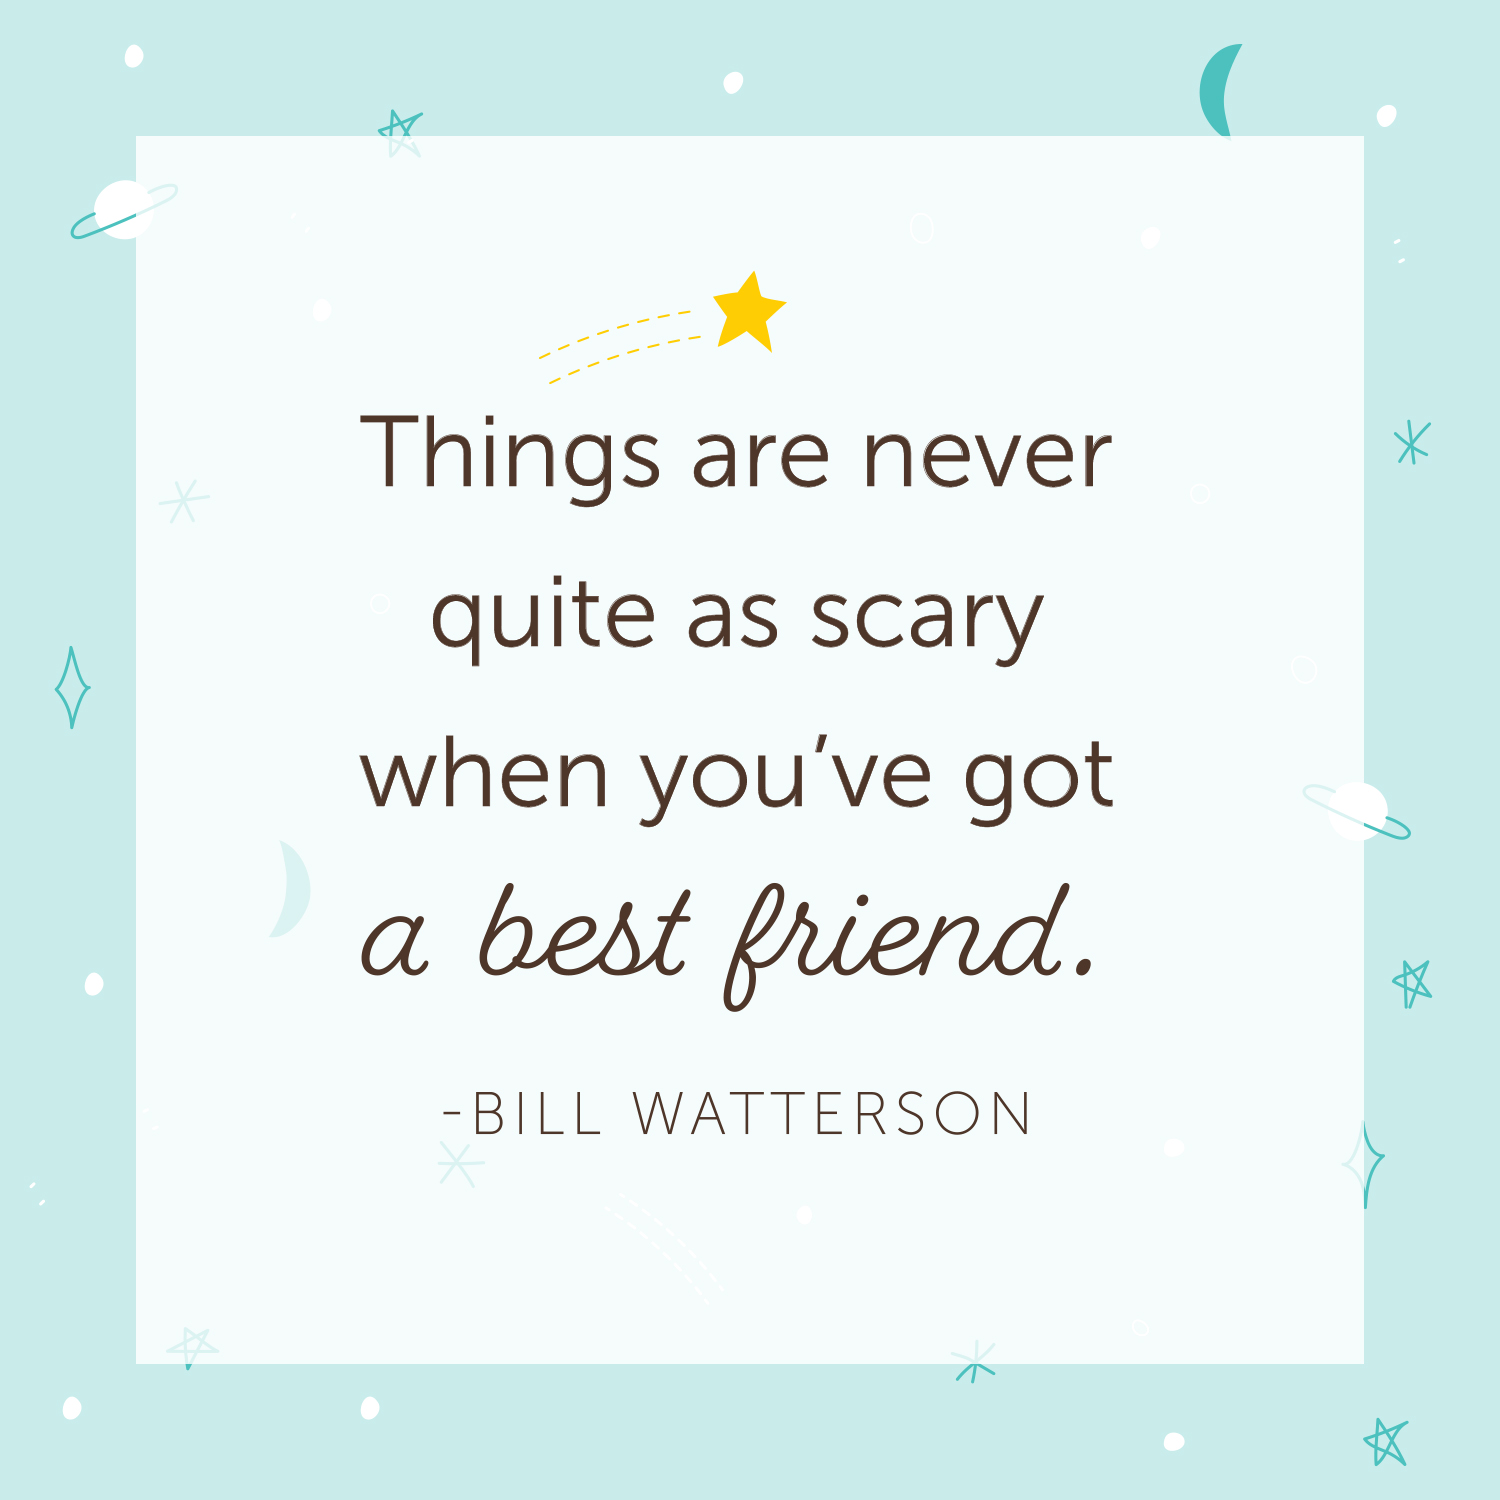 Friendship quotes meaningful Friendship Quotes